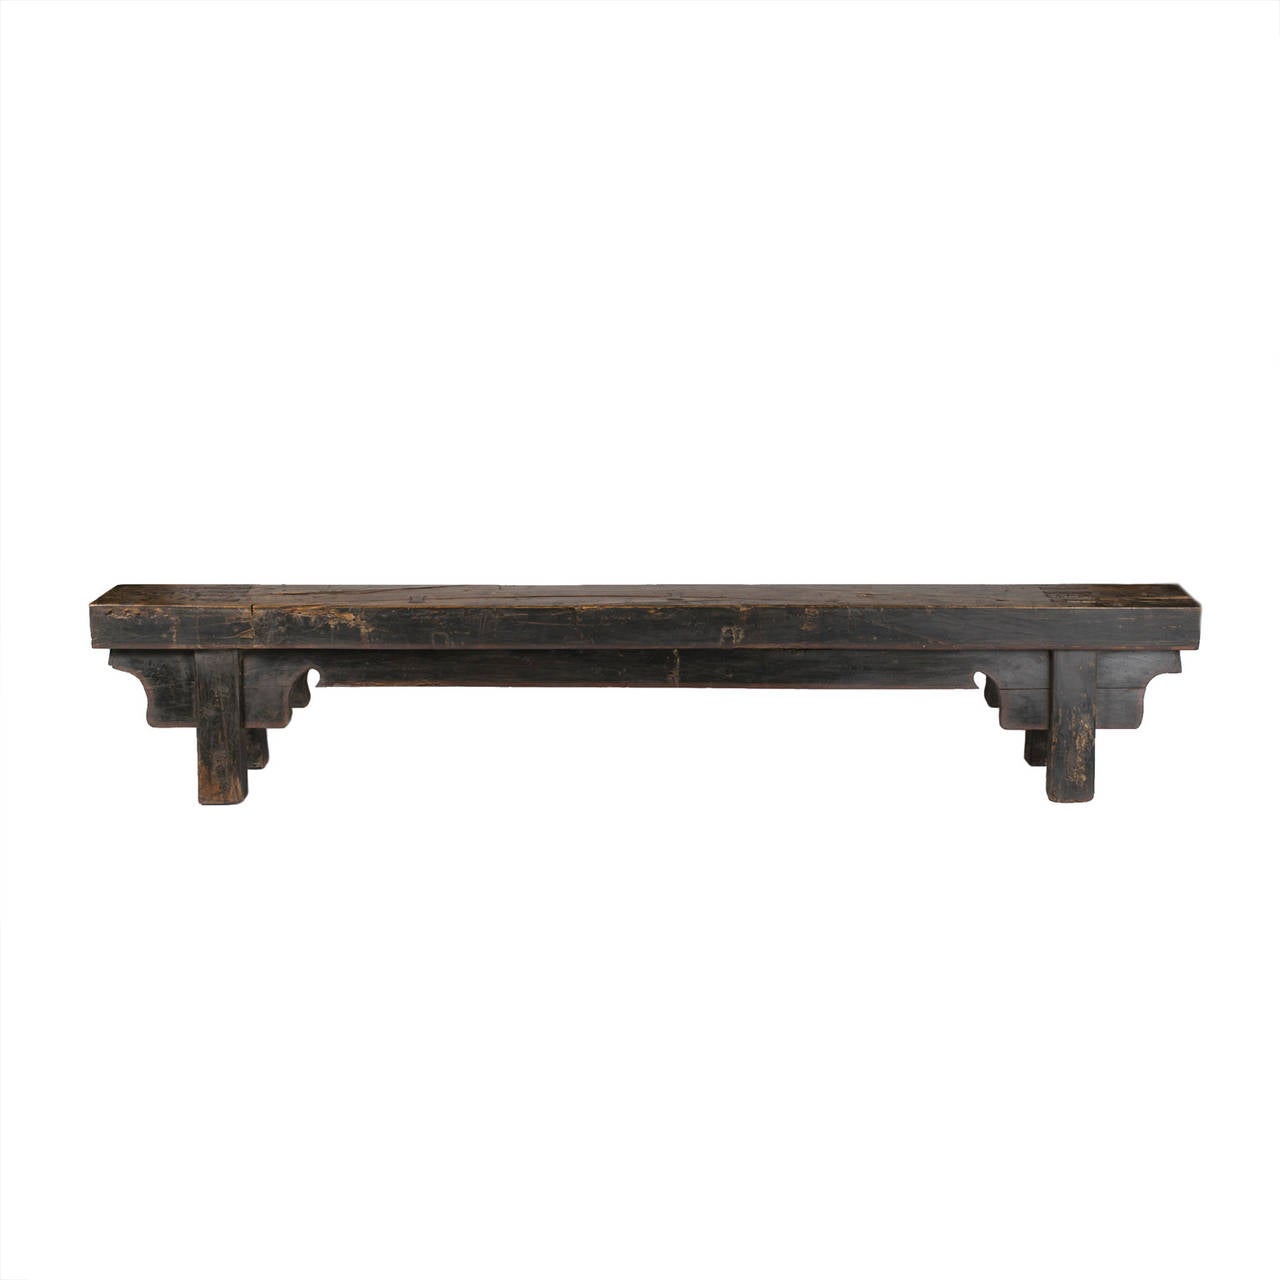 Pair of traditional elmwood Beijing benches with mortise and tenon joinery, in-set legs and plain apron.